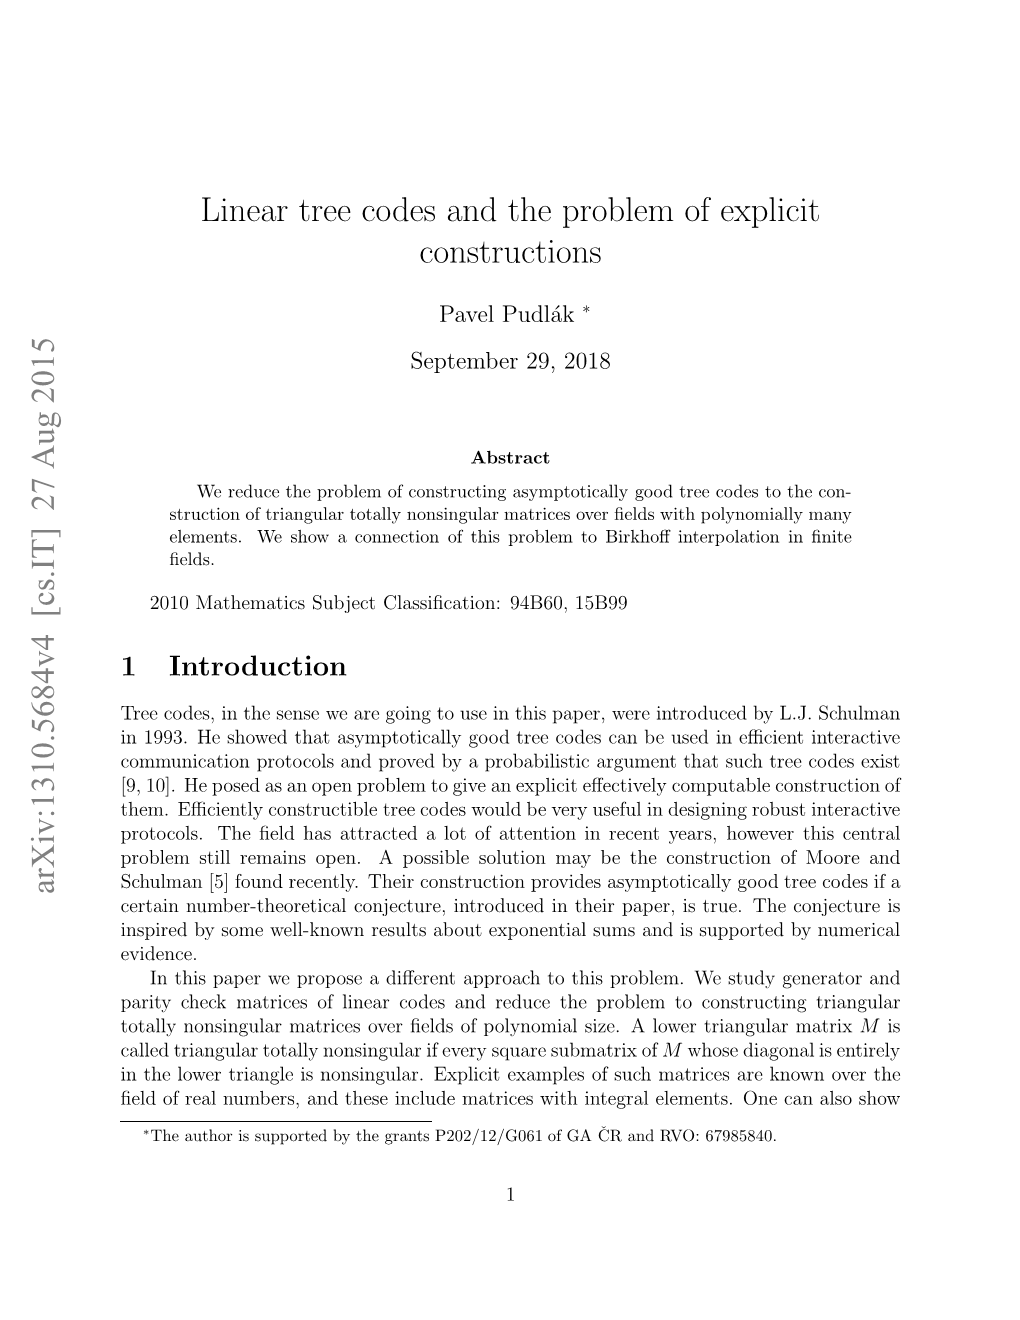 Linear Tree Codes and the Problem of Explicit Constructions